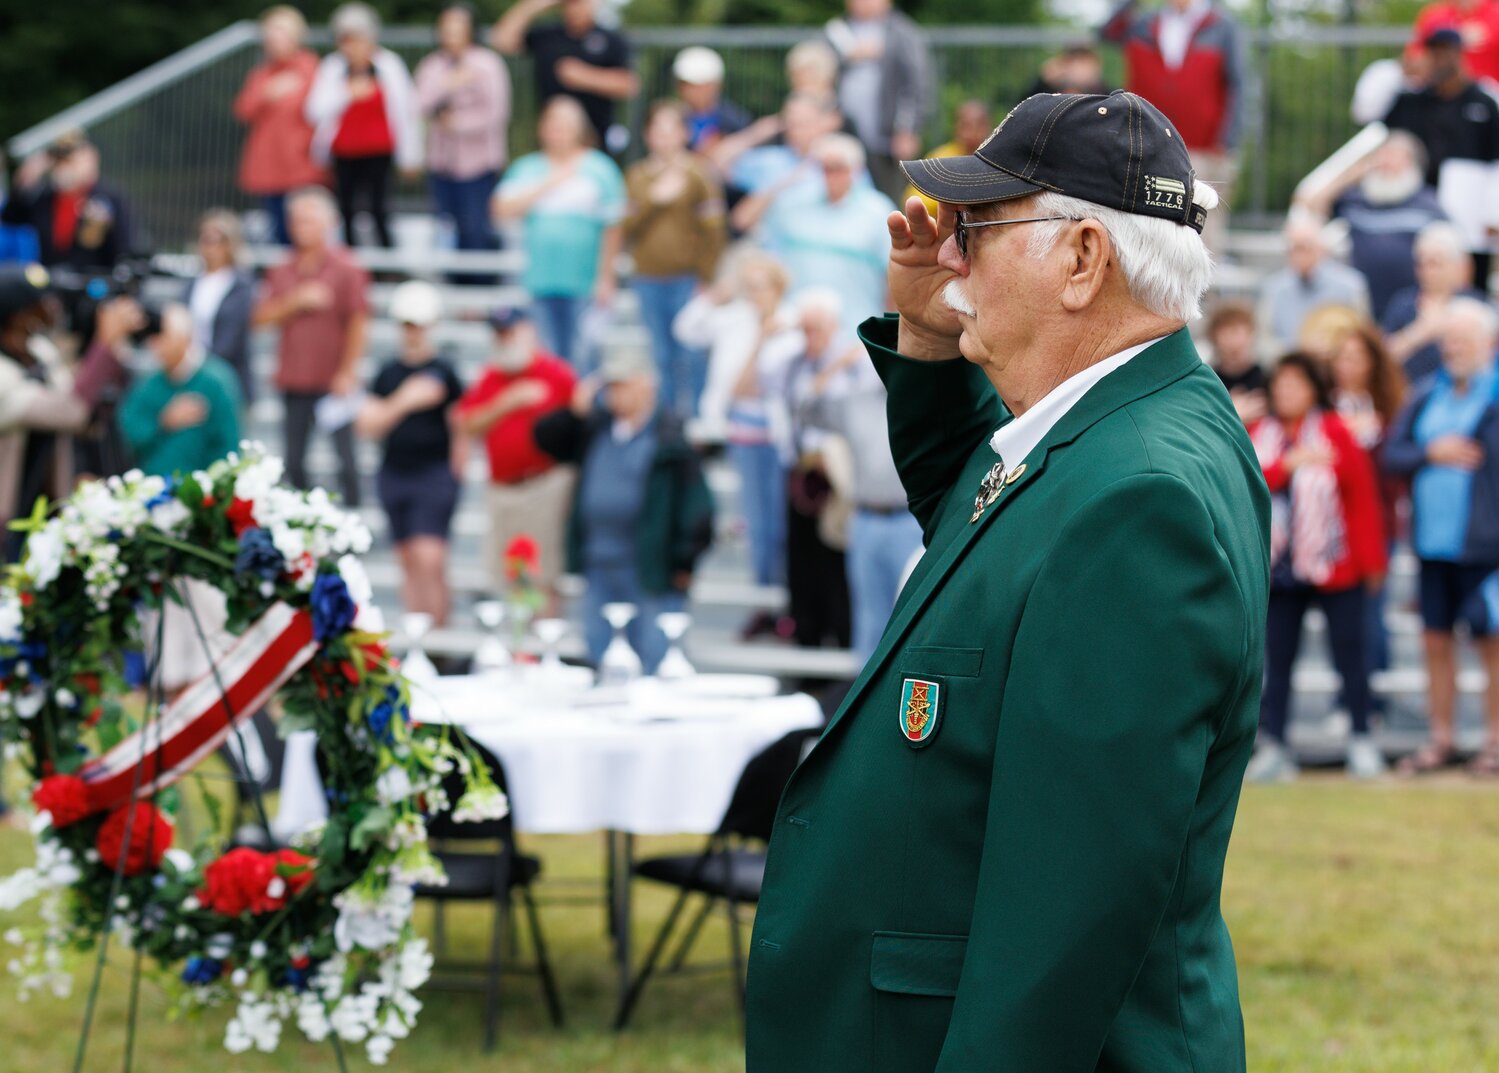 Don Talbot salutes during the Memorial Day ceremony at Freedom Memorial Park.